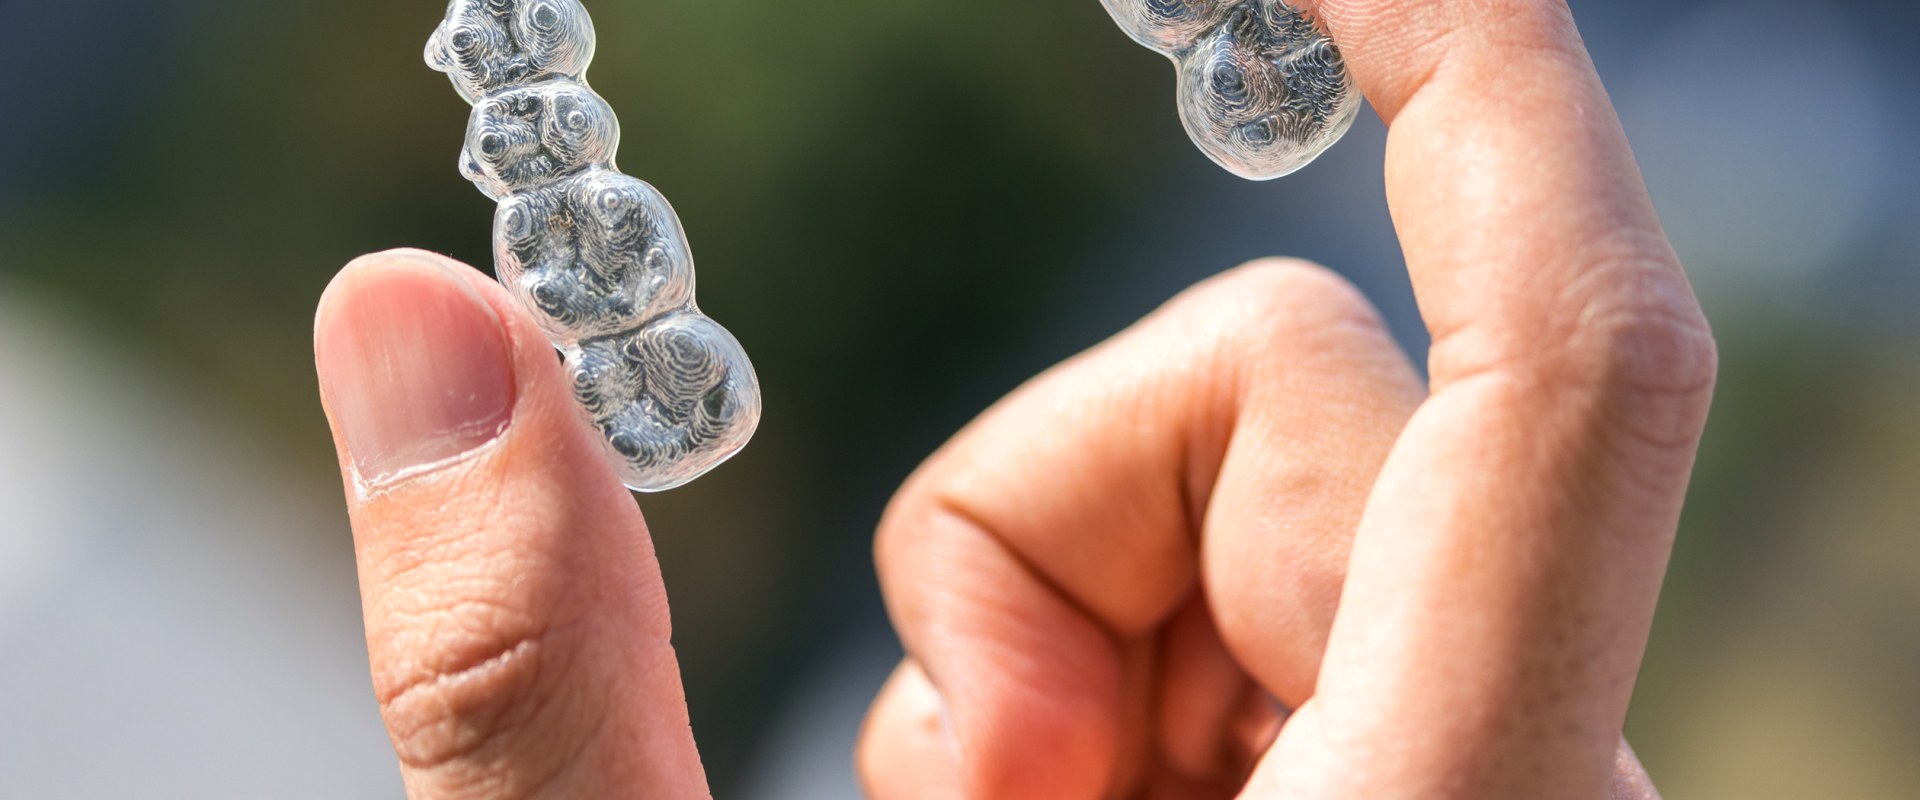 Can Orthodontists Make Money with Invisalign?